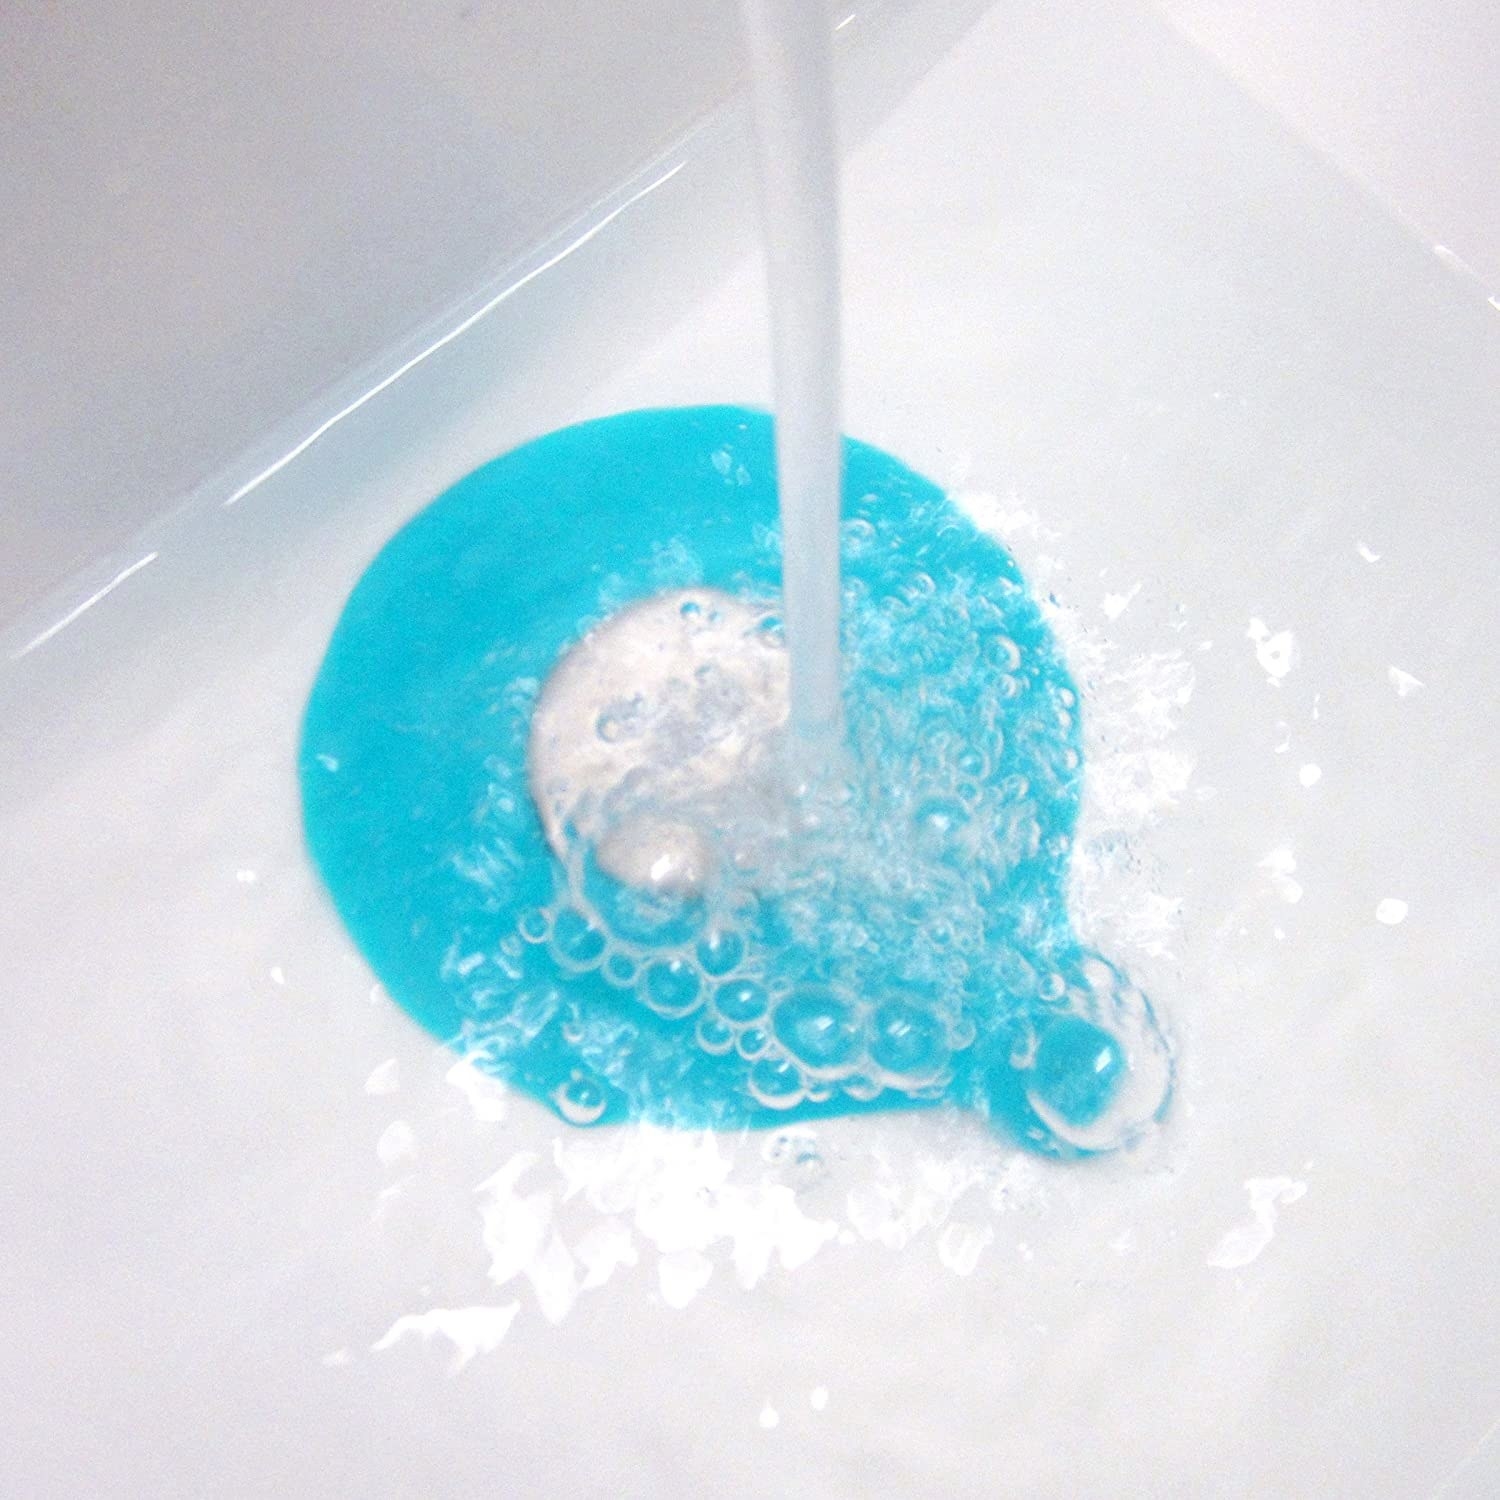 a blue tub stopper underneath a running water faucet